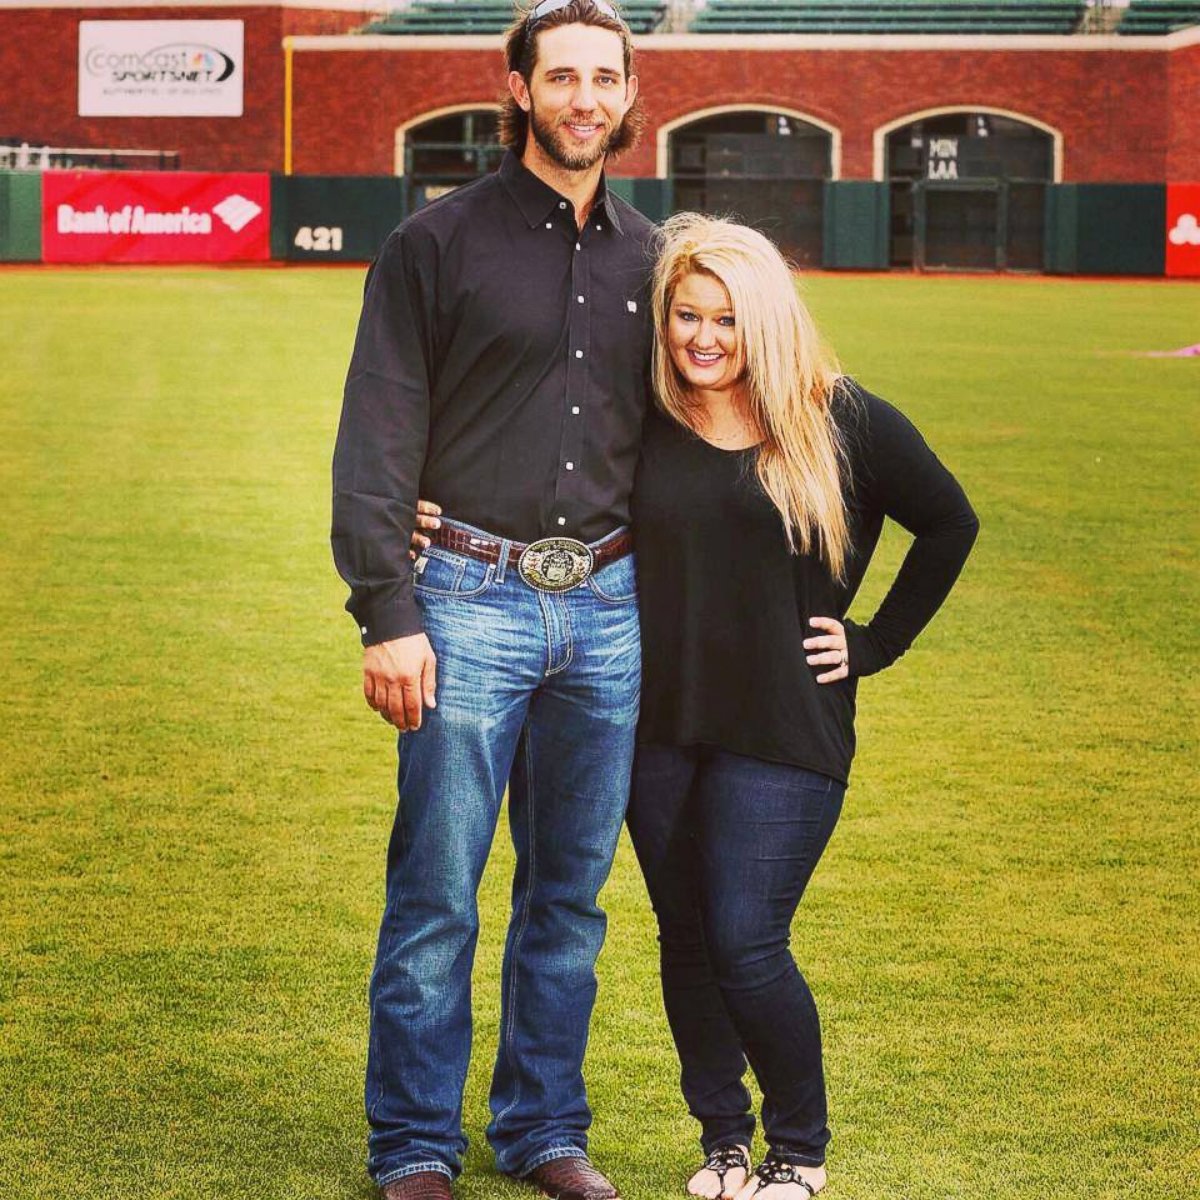 PHOTO: Madison Bumgarner married Ali Saunders in 2010. He plays for the San Francisco Giants.